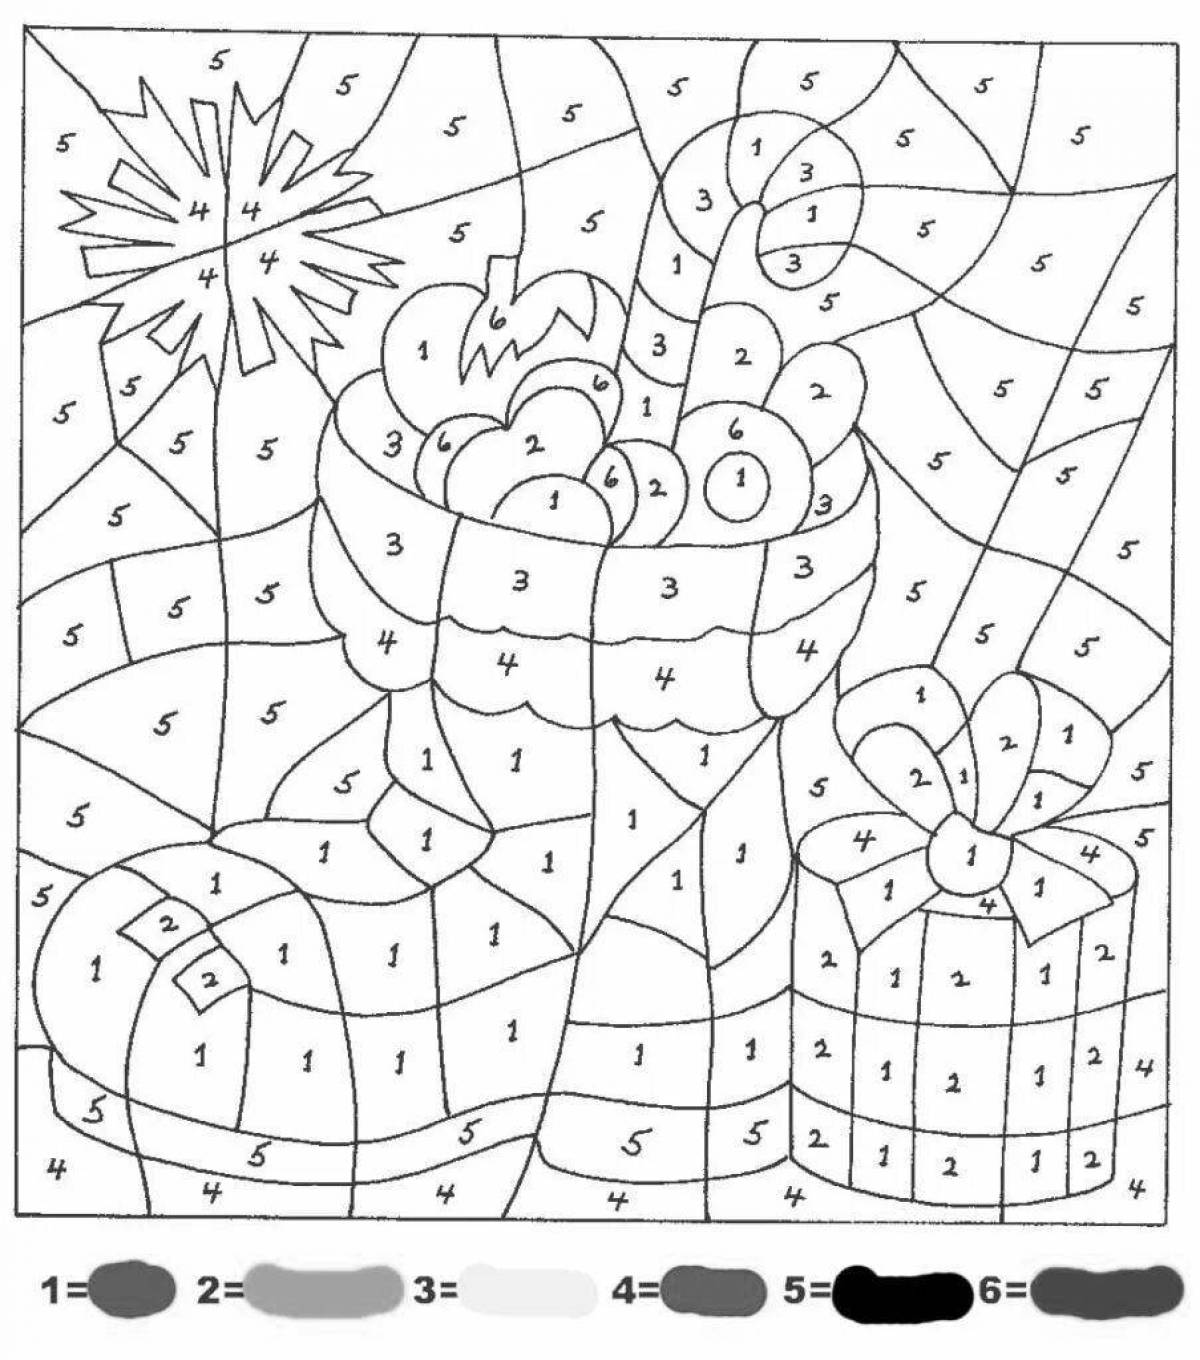 Wonderful phone from cells coloring page